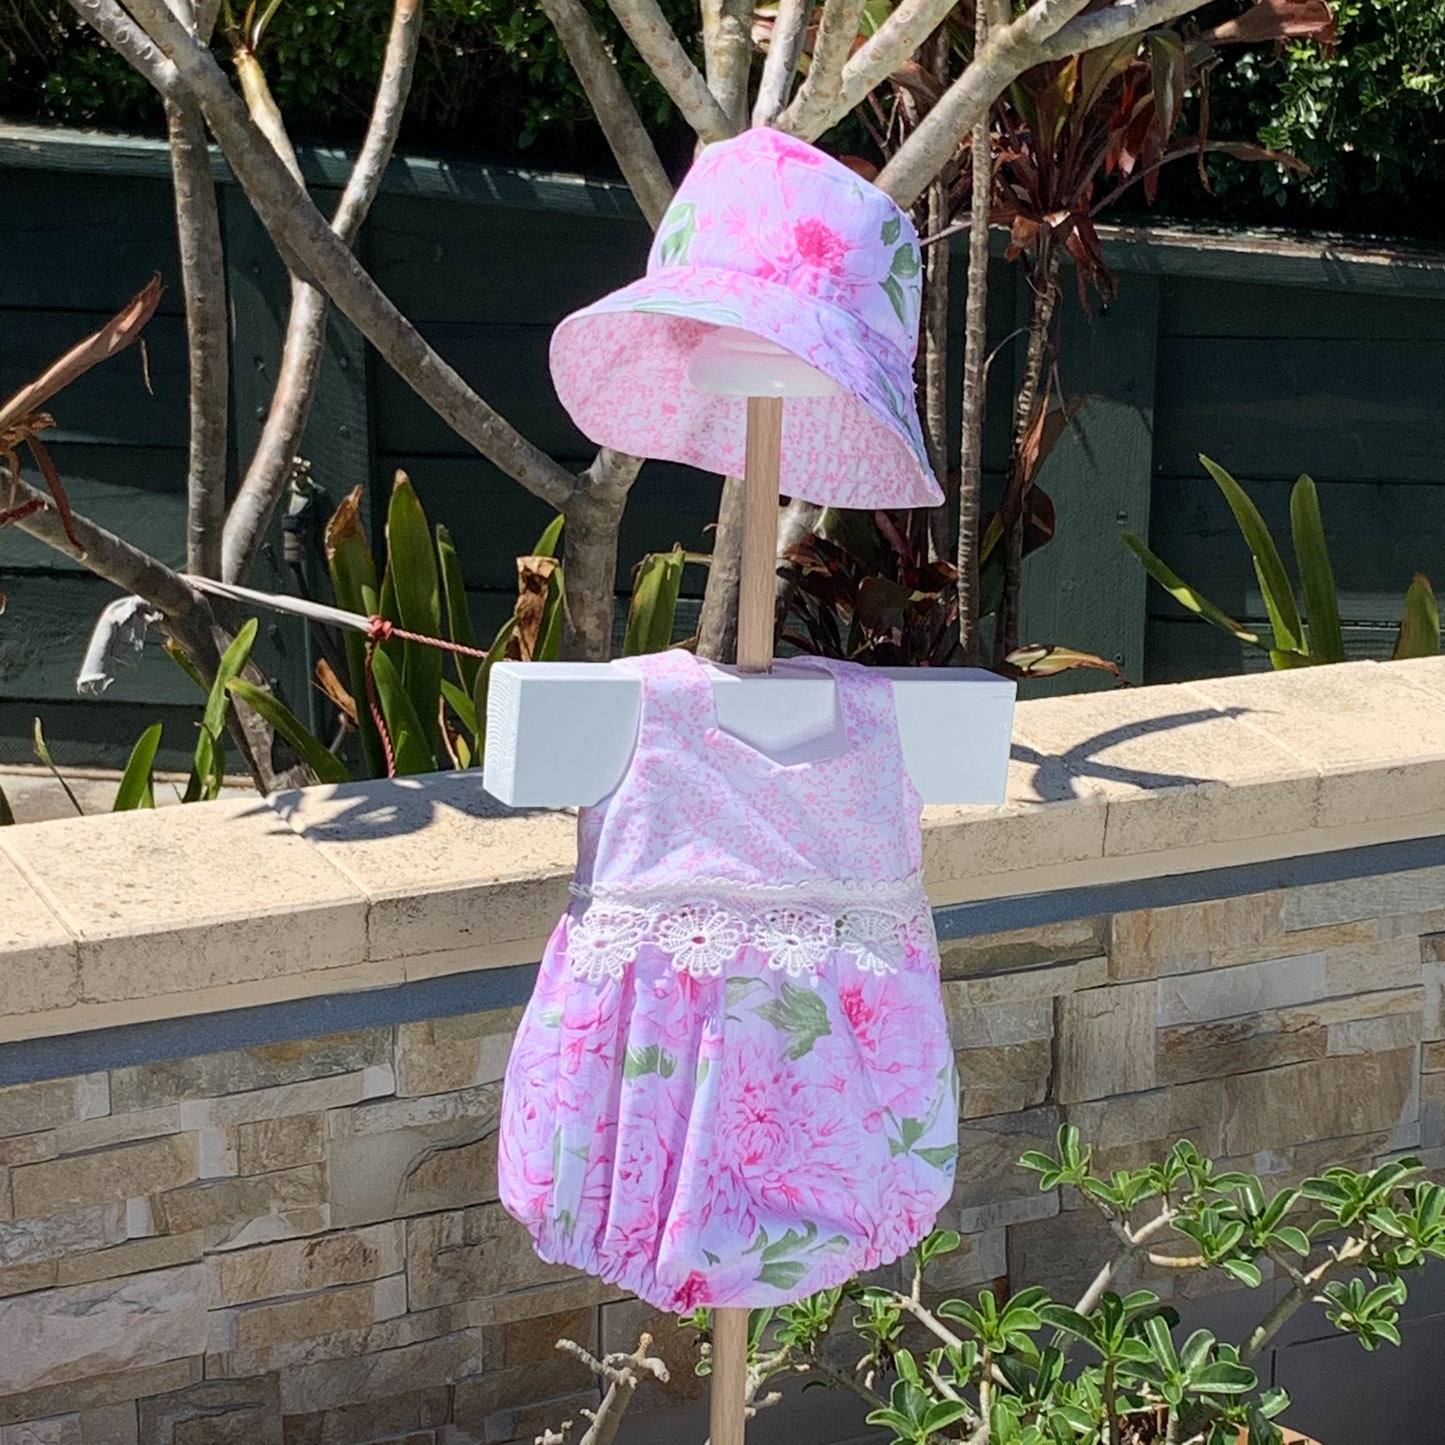 2 Piece - Romper with Flosstyle Hat - Floral Cotton Fabric and Lace Trims